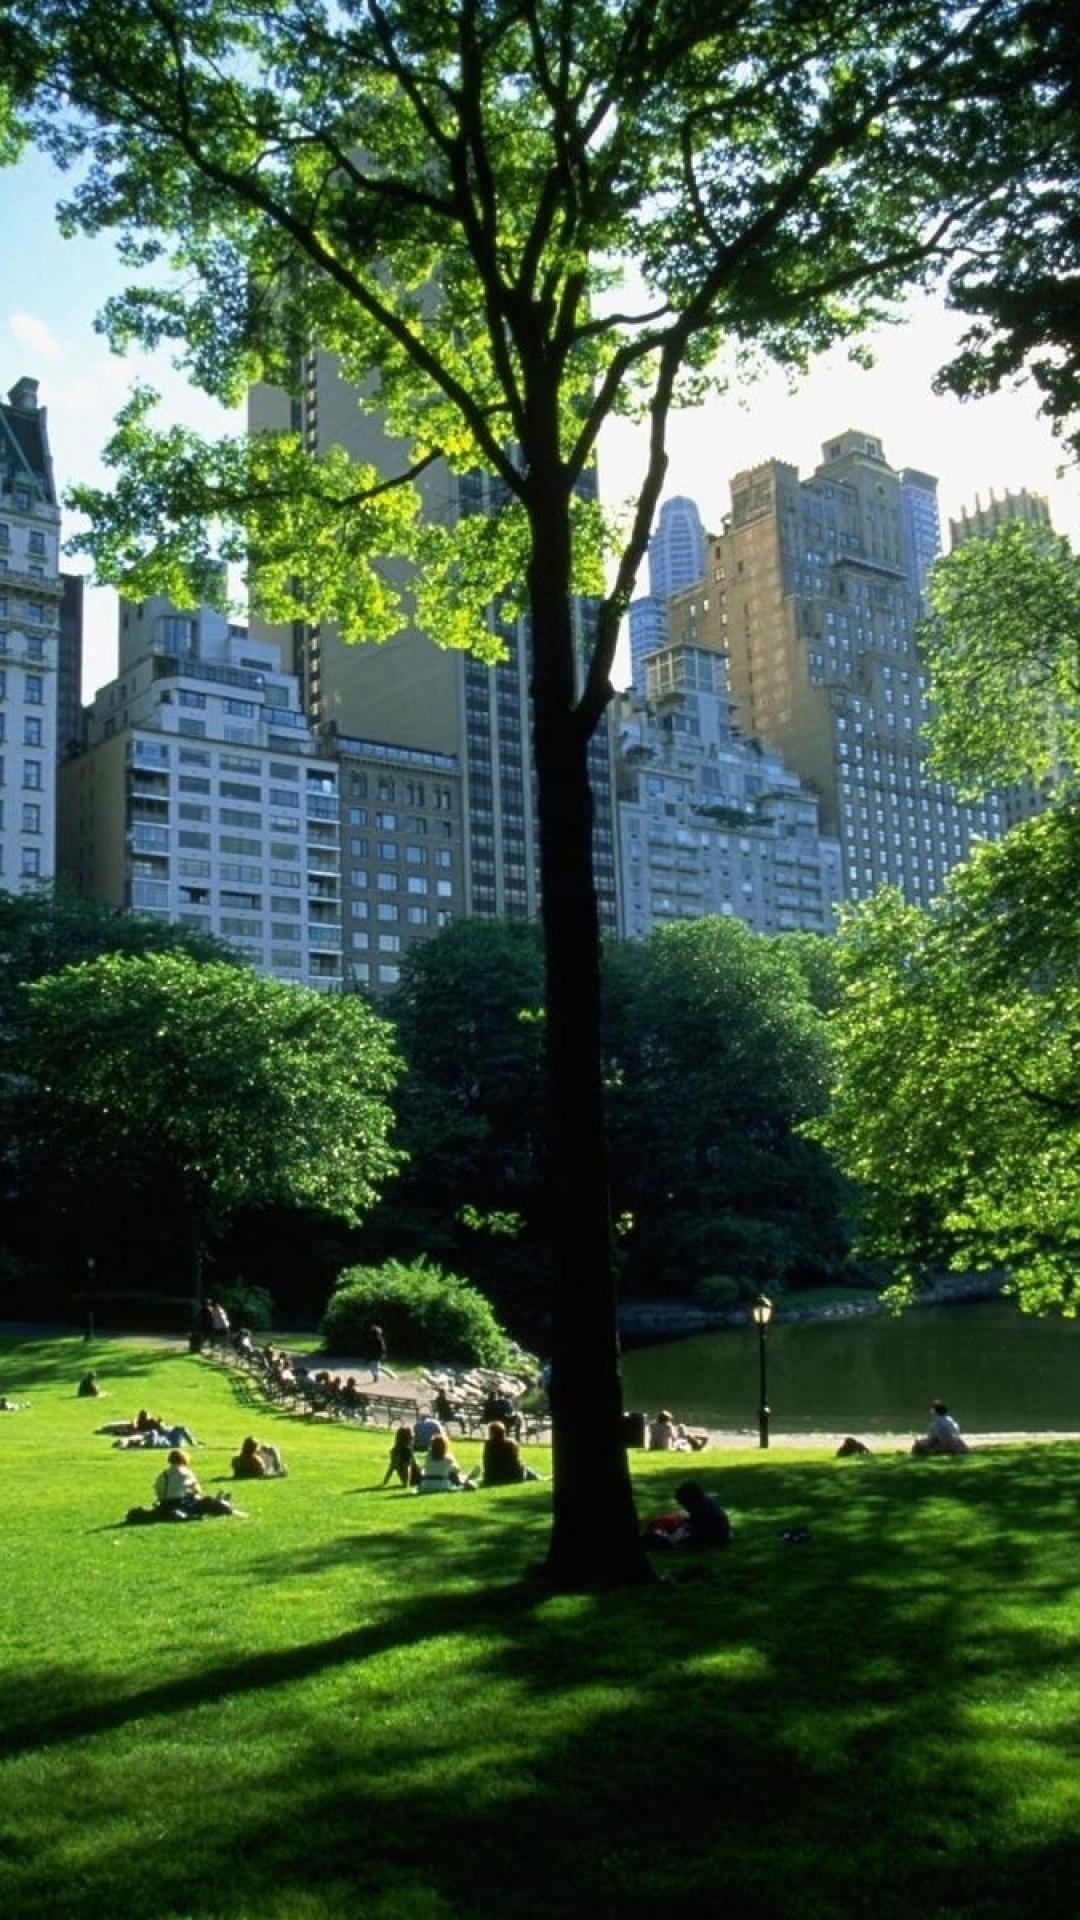 Central Park: One of the most famous urban green spaces in the entire world, Grassland. 1080x1920 Full HD Wallpaper.